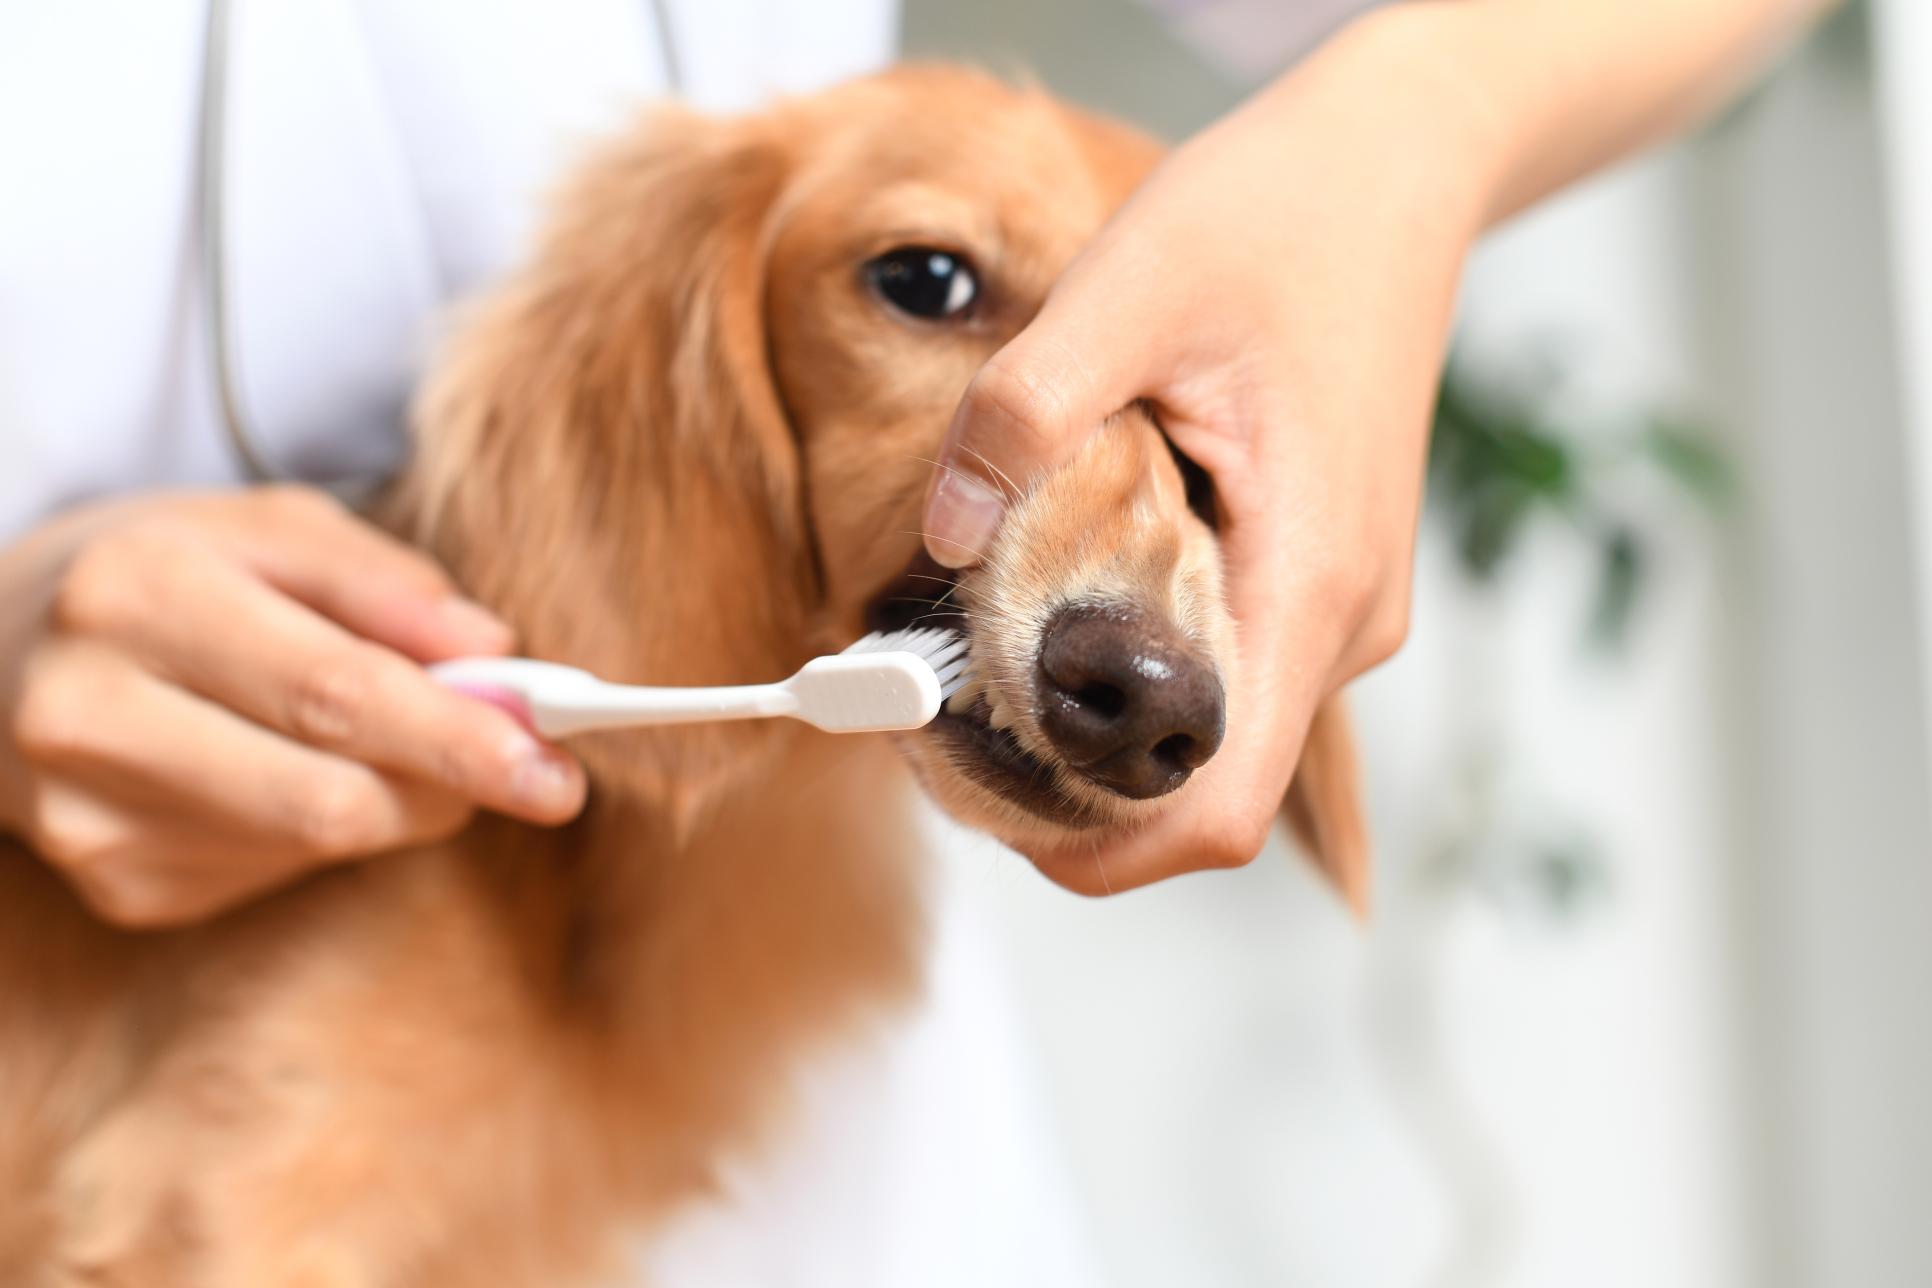 Common Dental Procedures for Pets: When and Why?